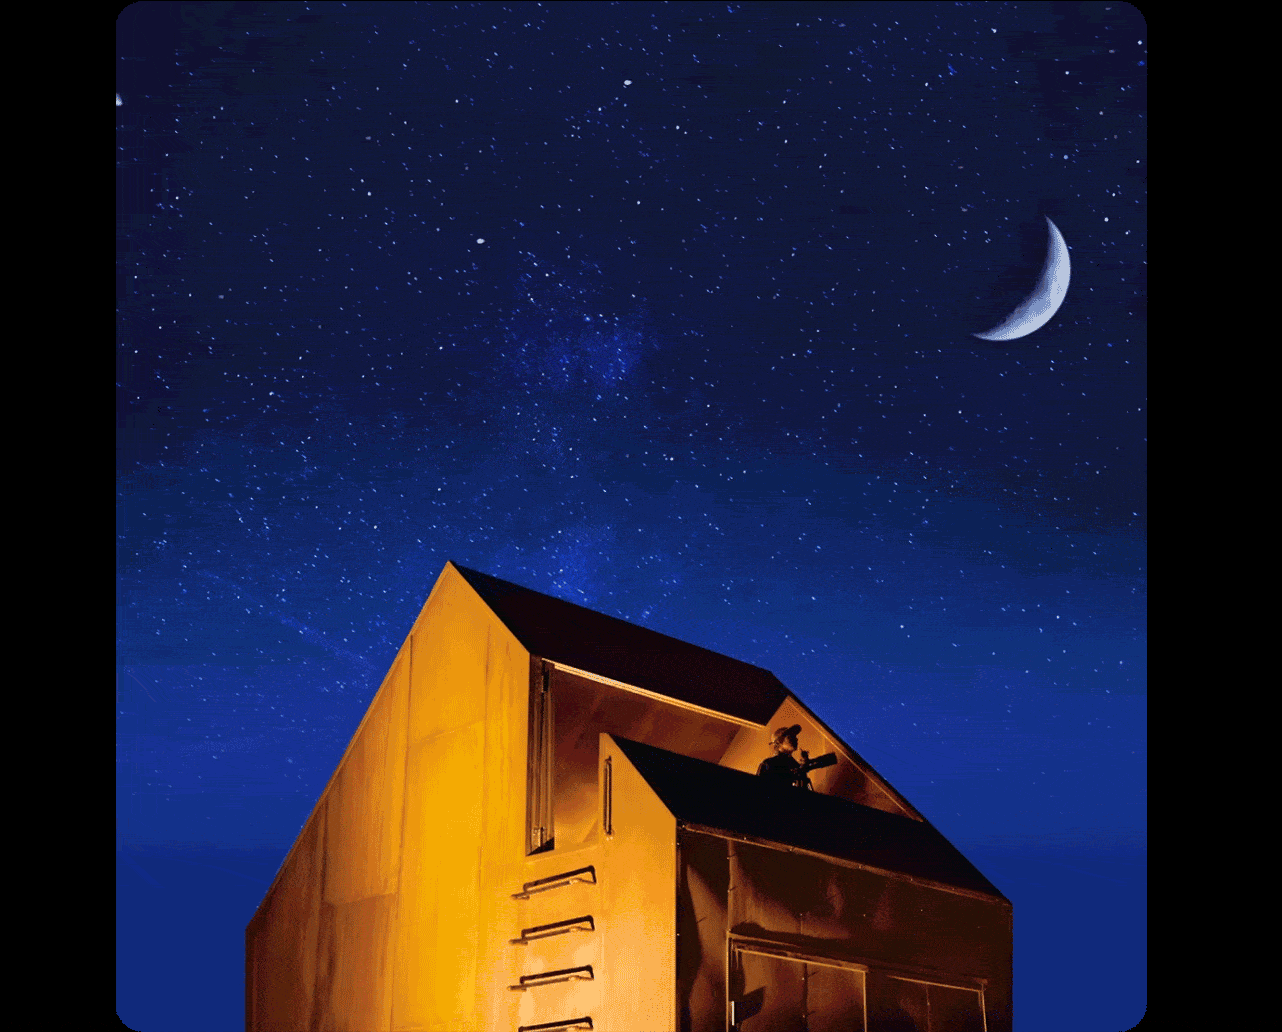 A moonlit, nighttime cinemagraph of a stay with an open top observation deck where a man stargazes with his telescope. A shooting star passes overhead.